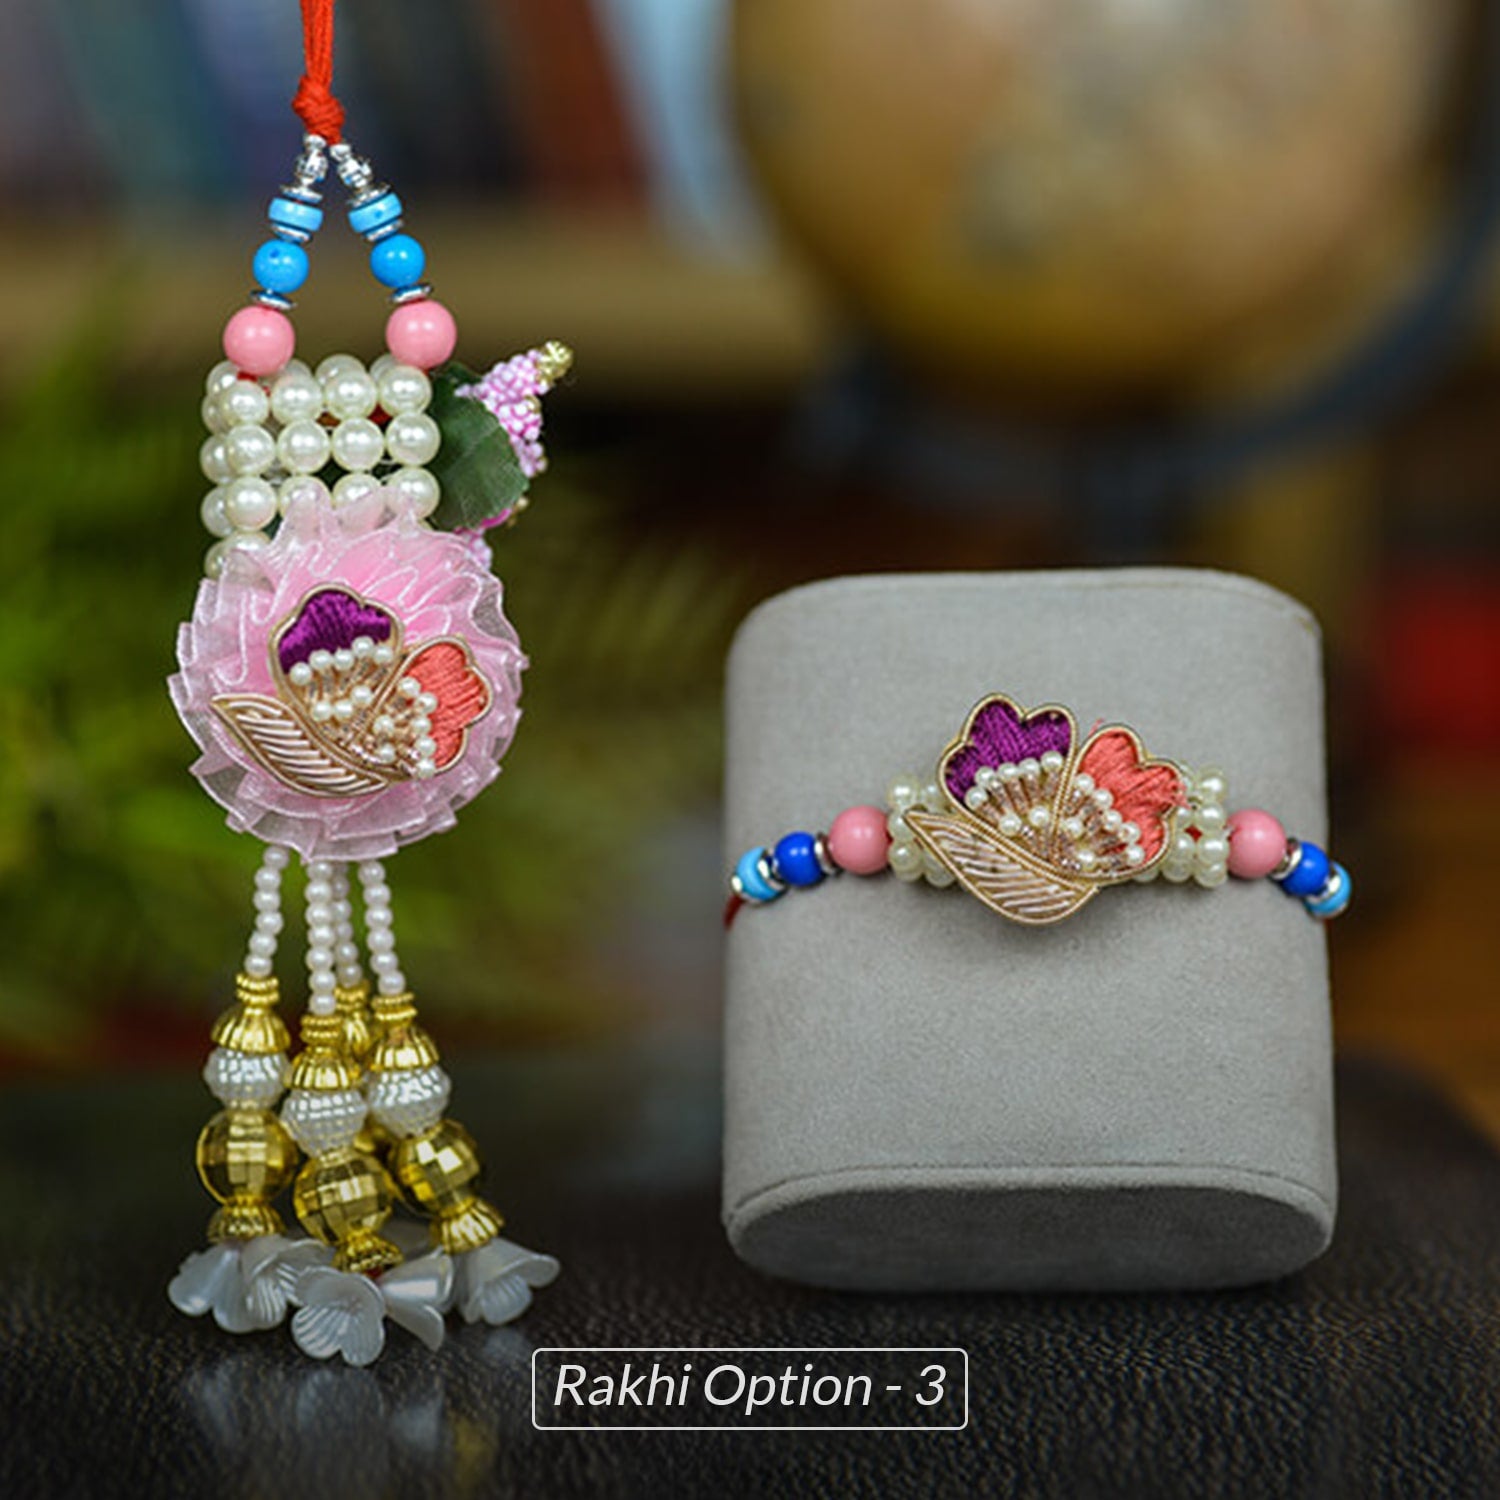 Awesome Rakhi Hamper With Laddus For Brother And Bhabhi